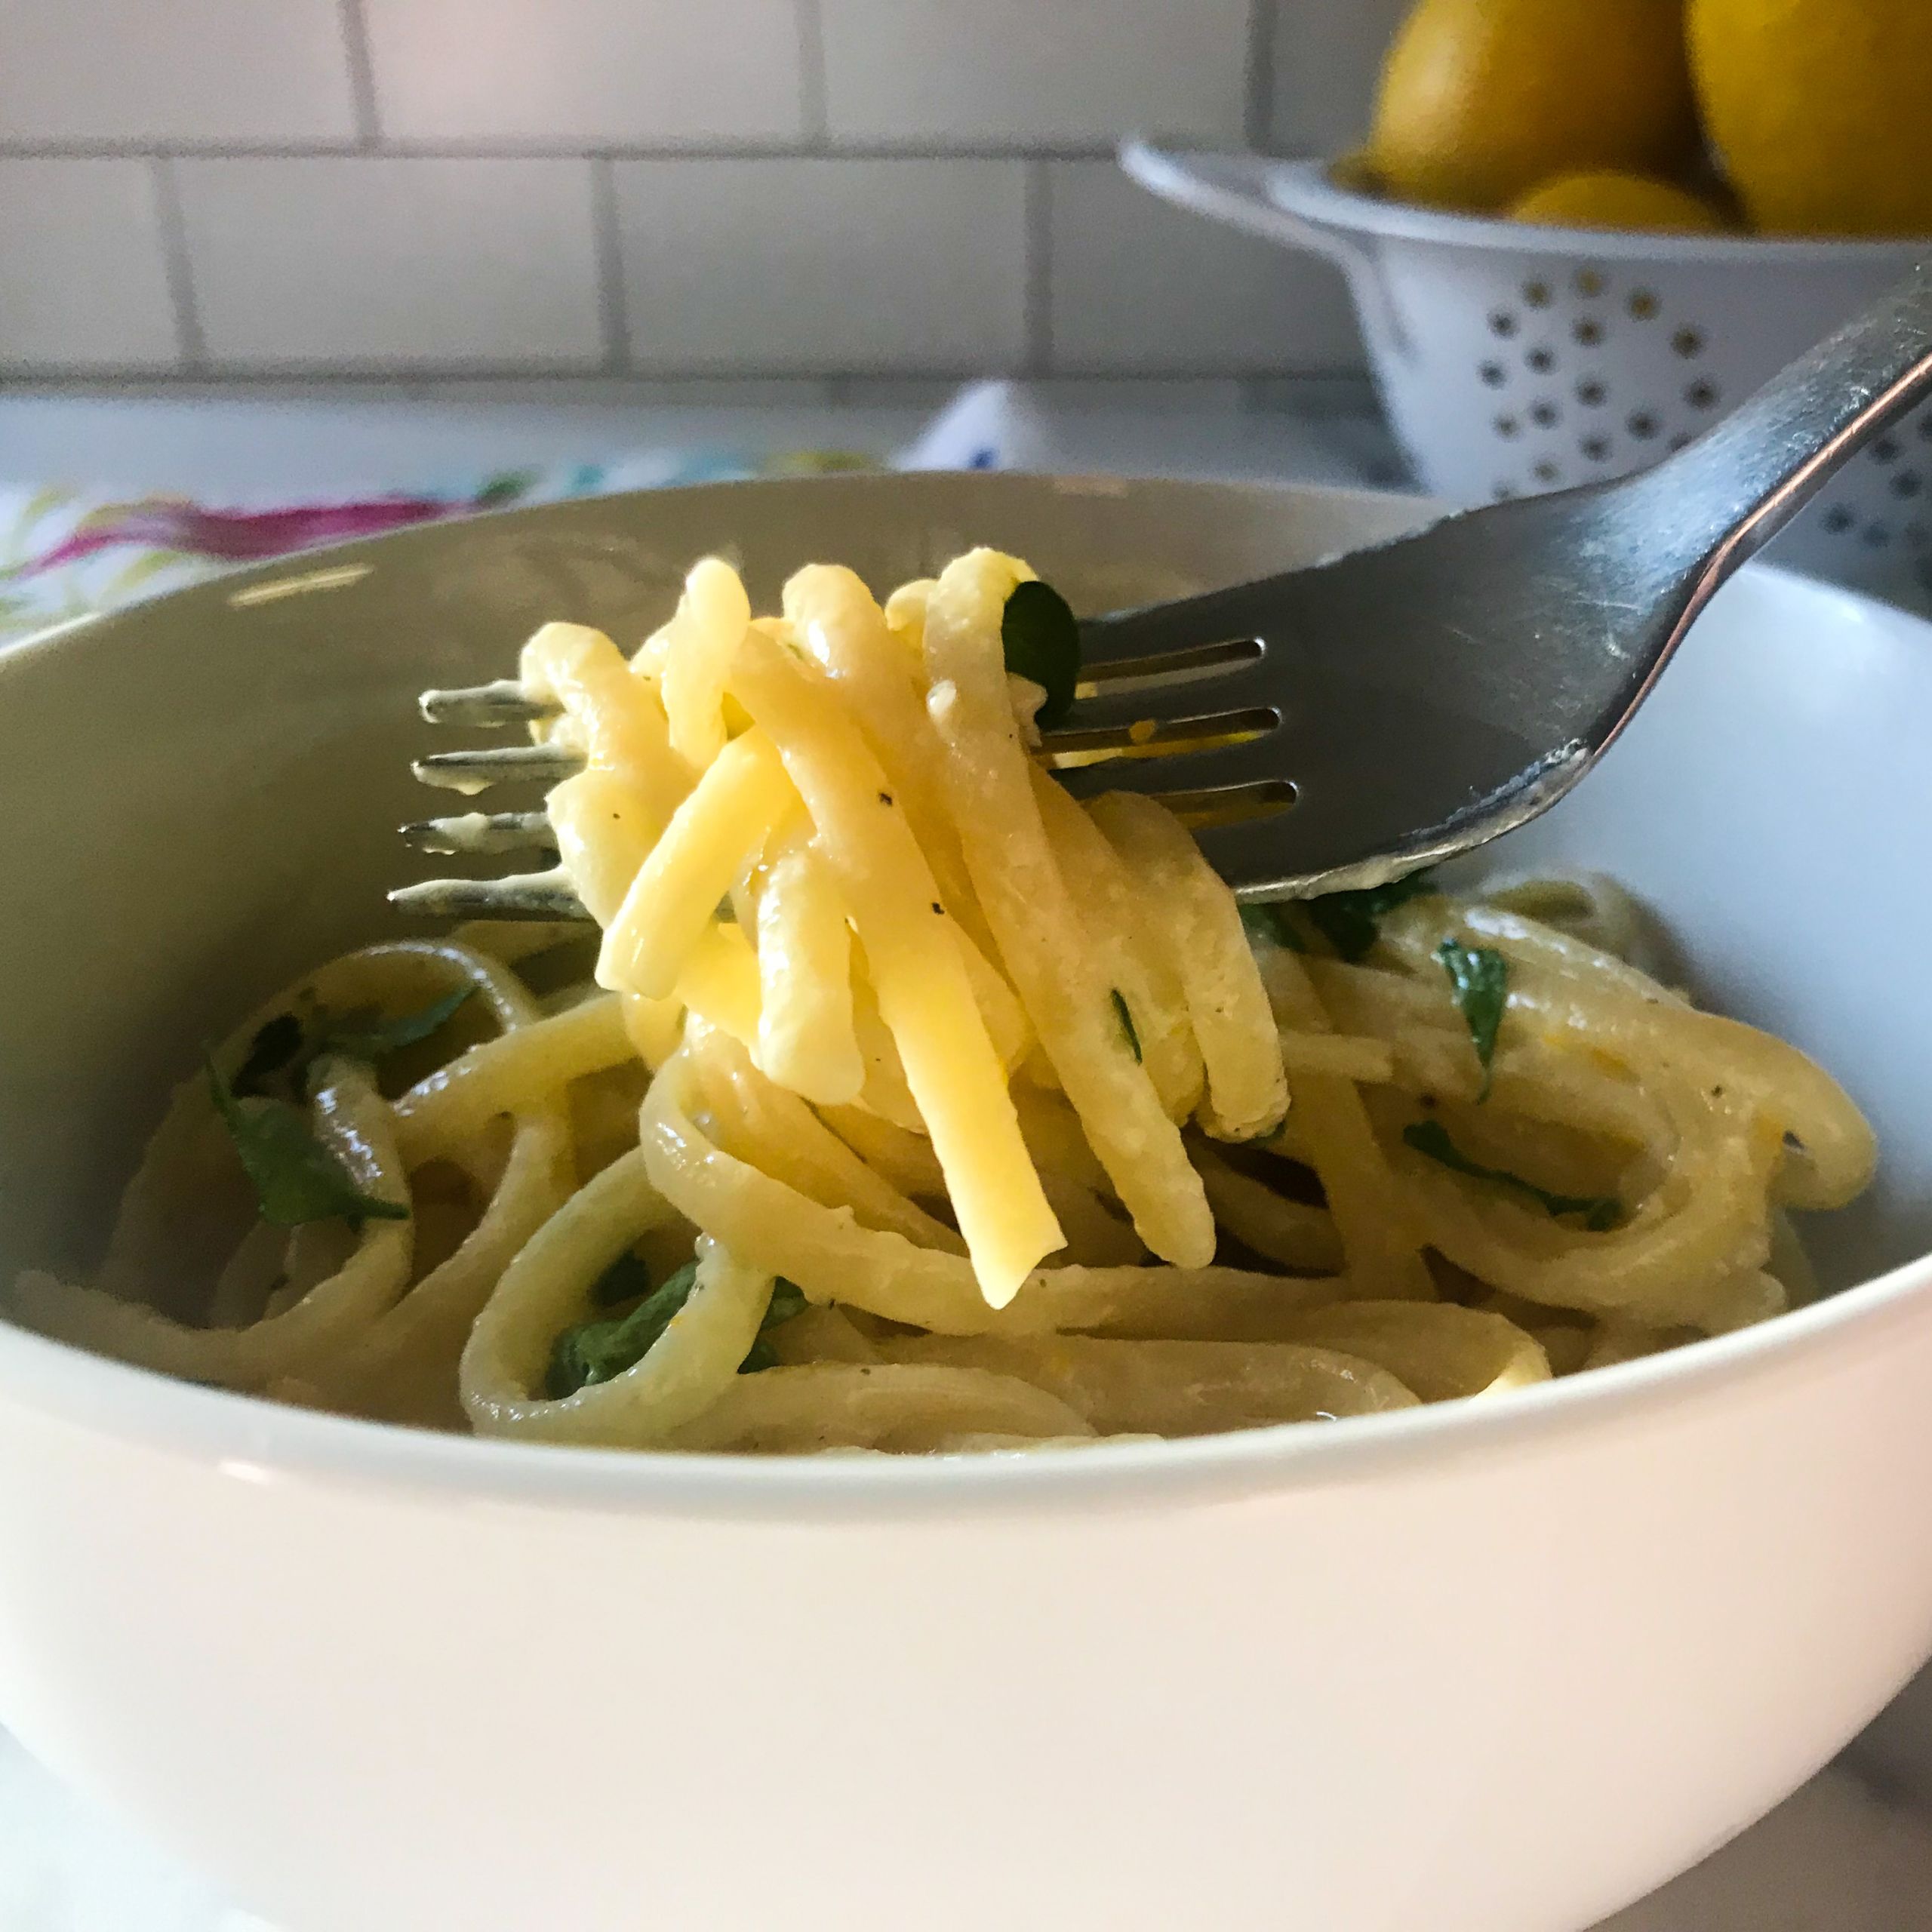 forkful of pasta | my curated tastes